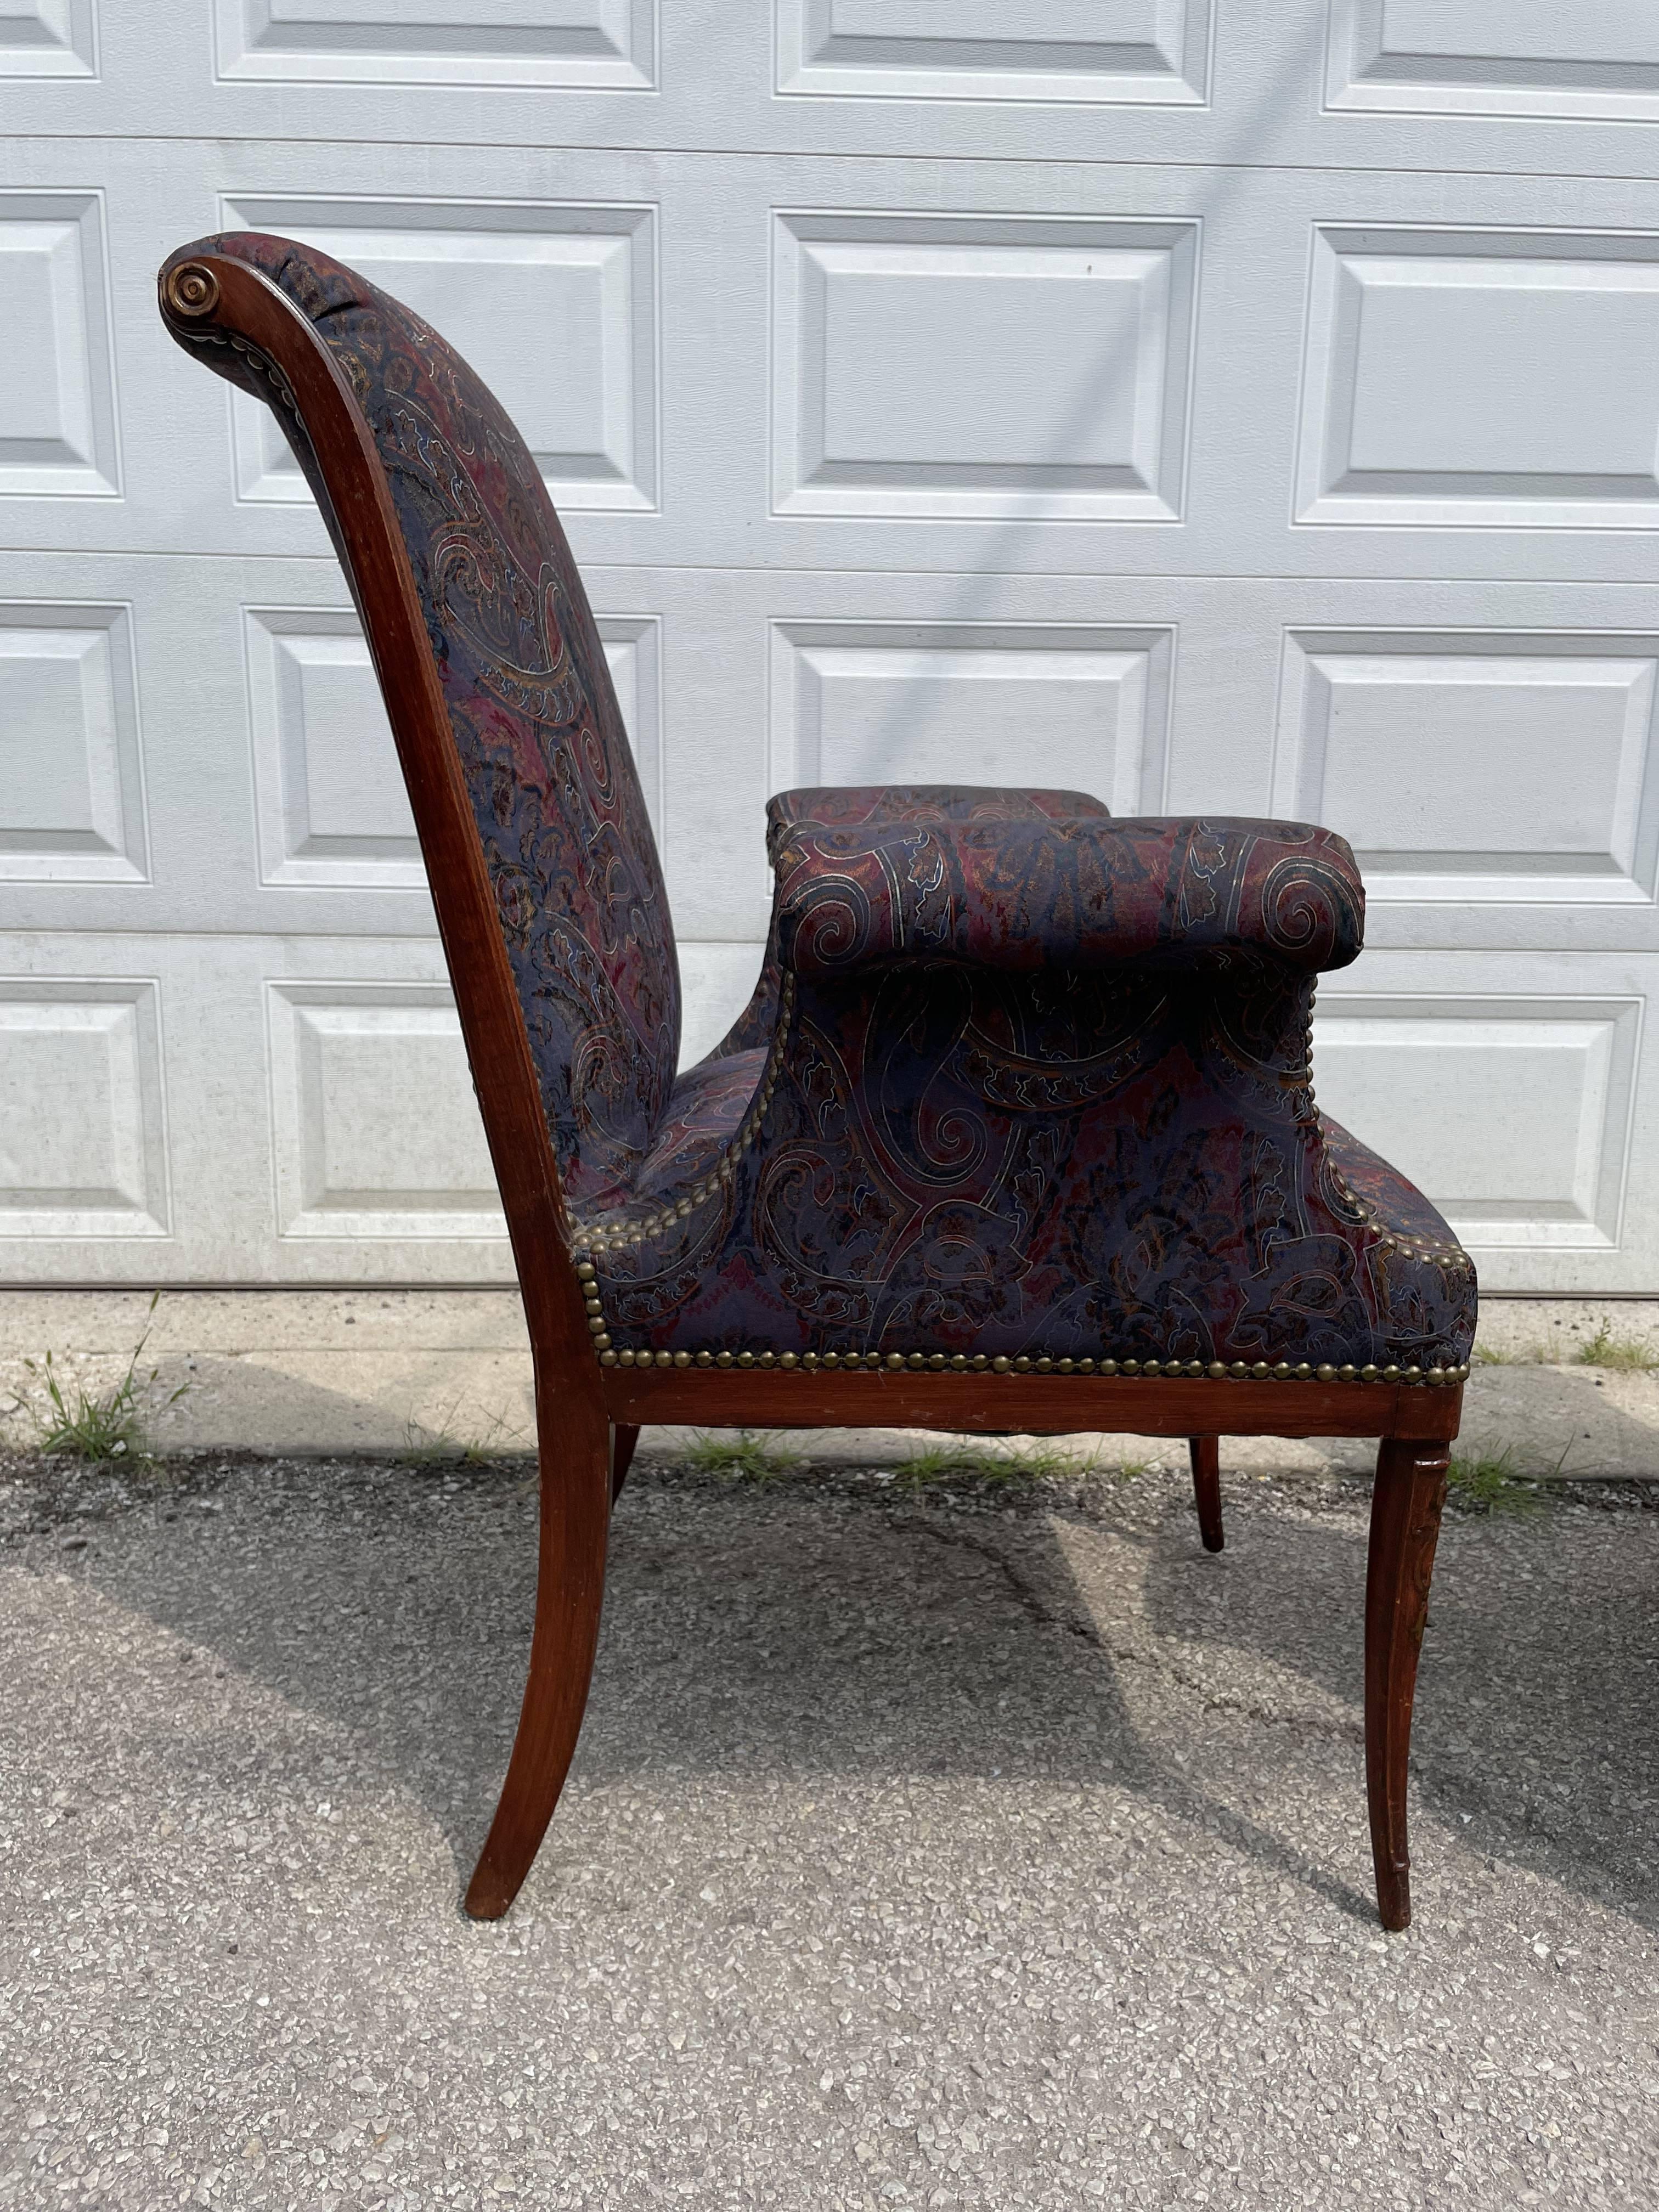 Absolutely stunning chairs from the early 1900’s. They are not only stunning but quite comfortable too! Recently reupholstered with new foam/webbing etc but the previous owner didn’t redo the wood. The original upholstery is still